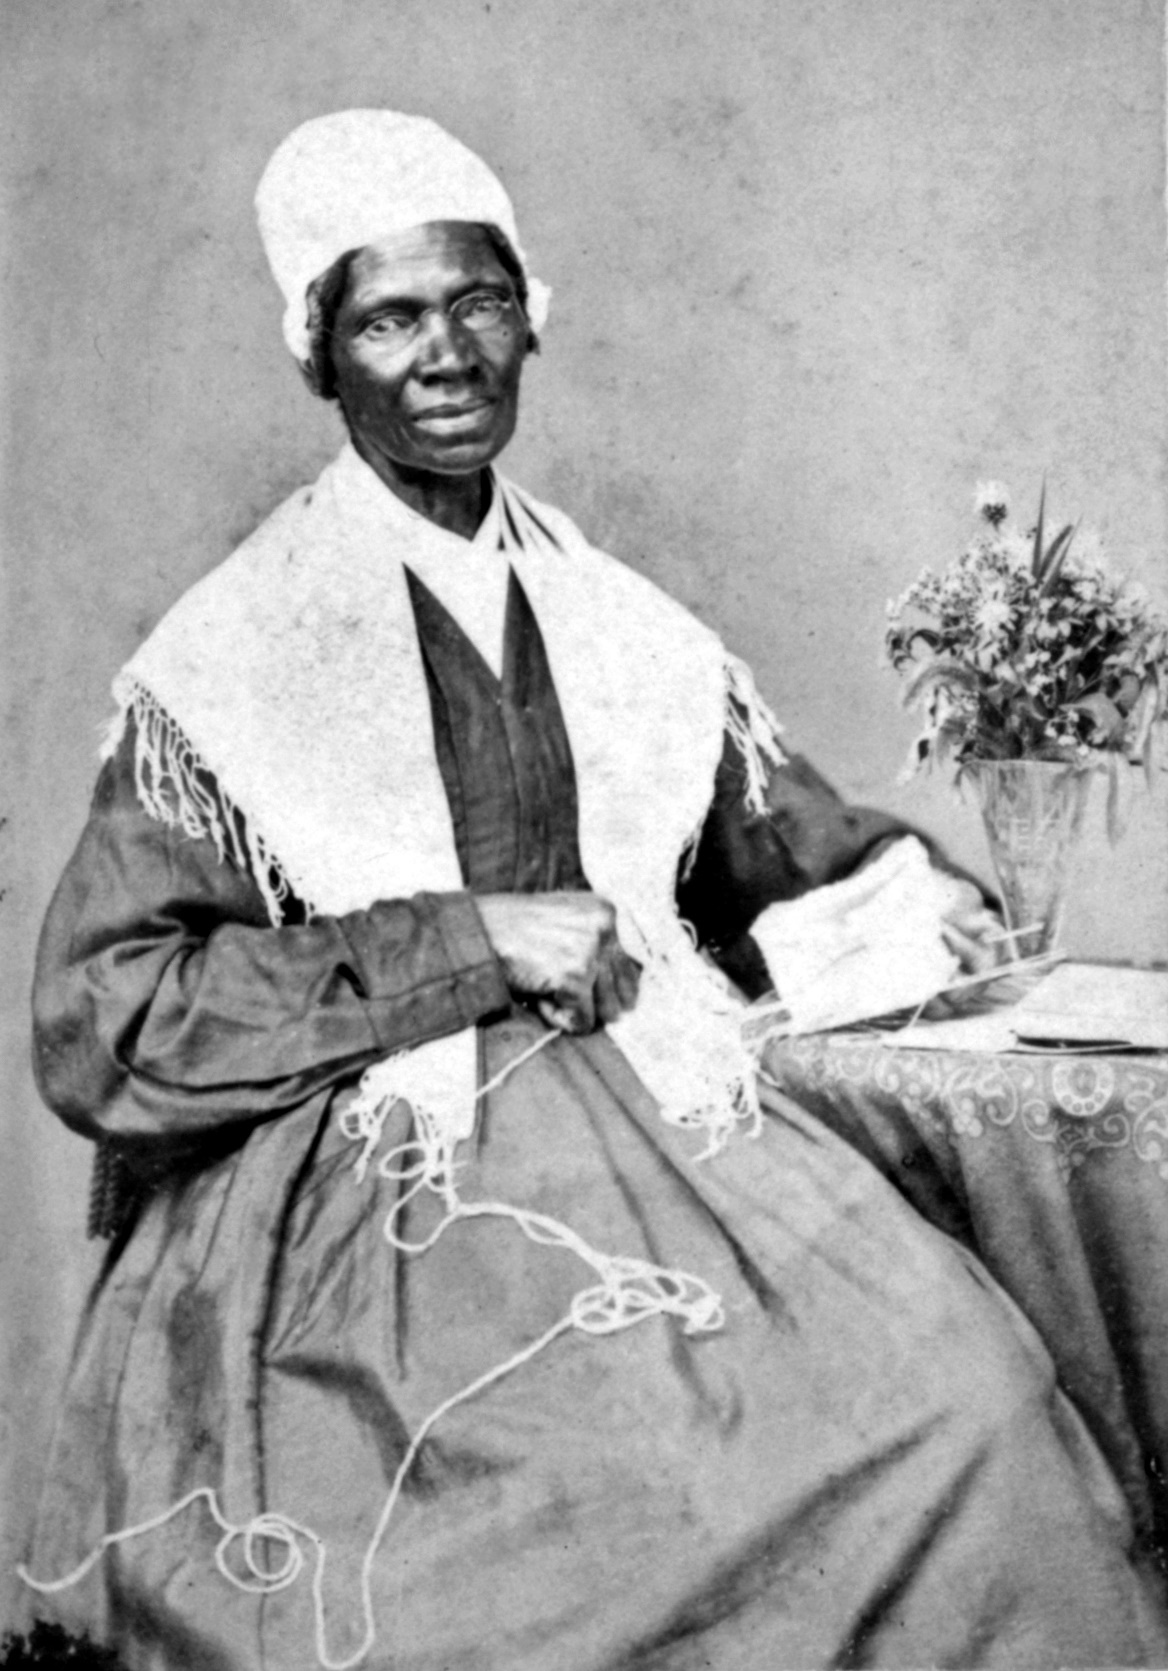 Tall Within: The Story of Sojourner Truth